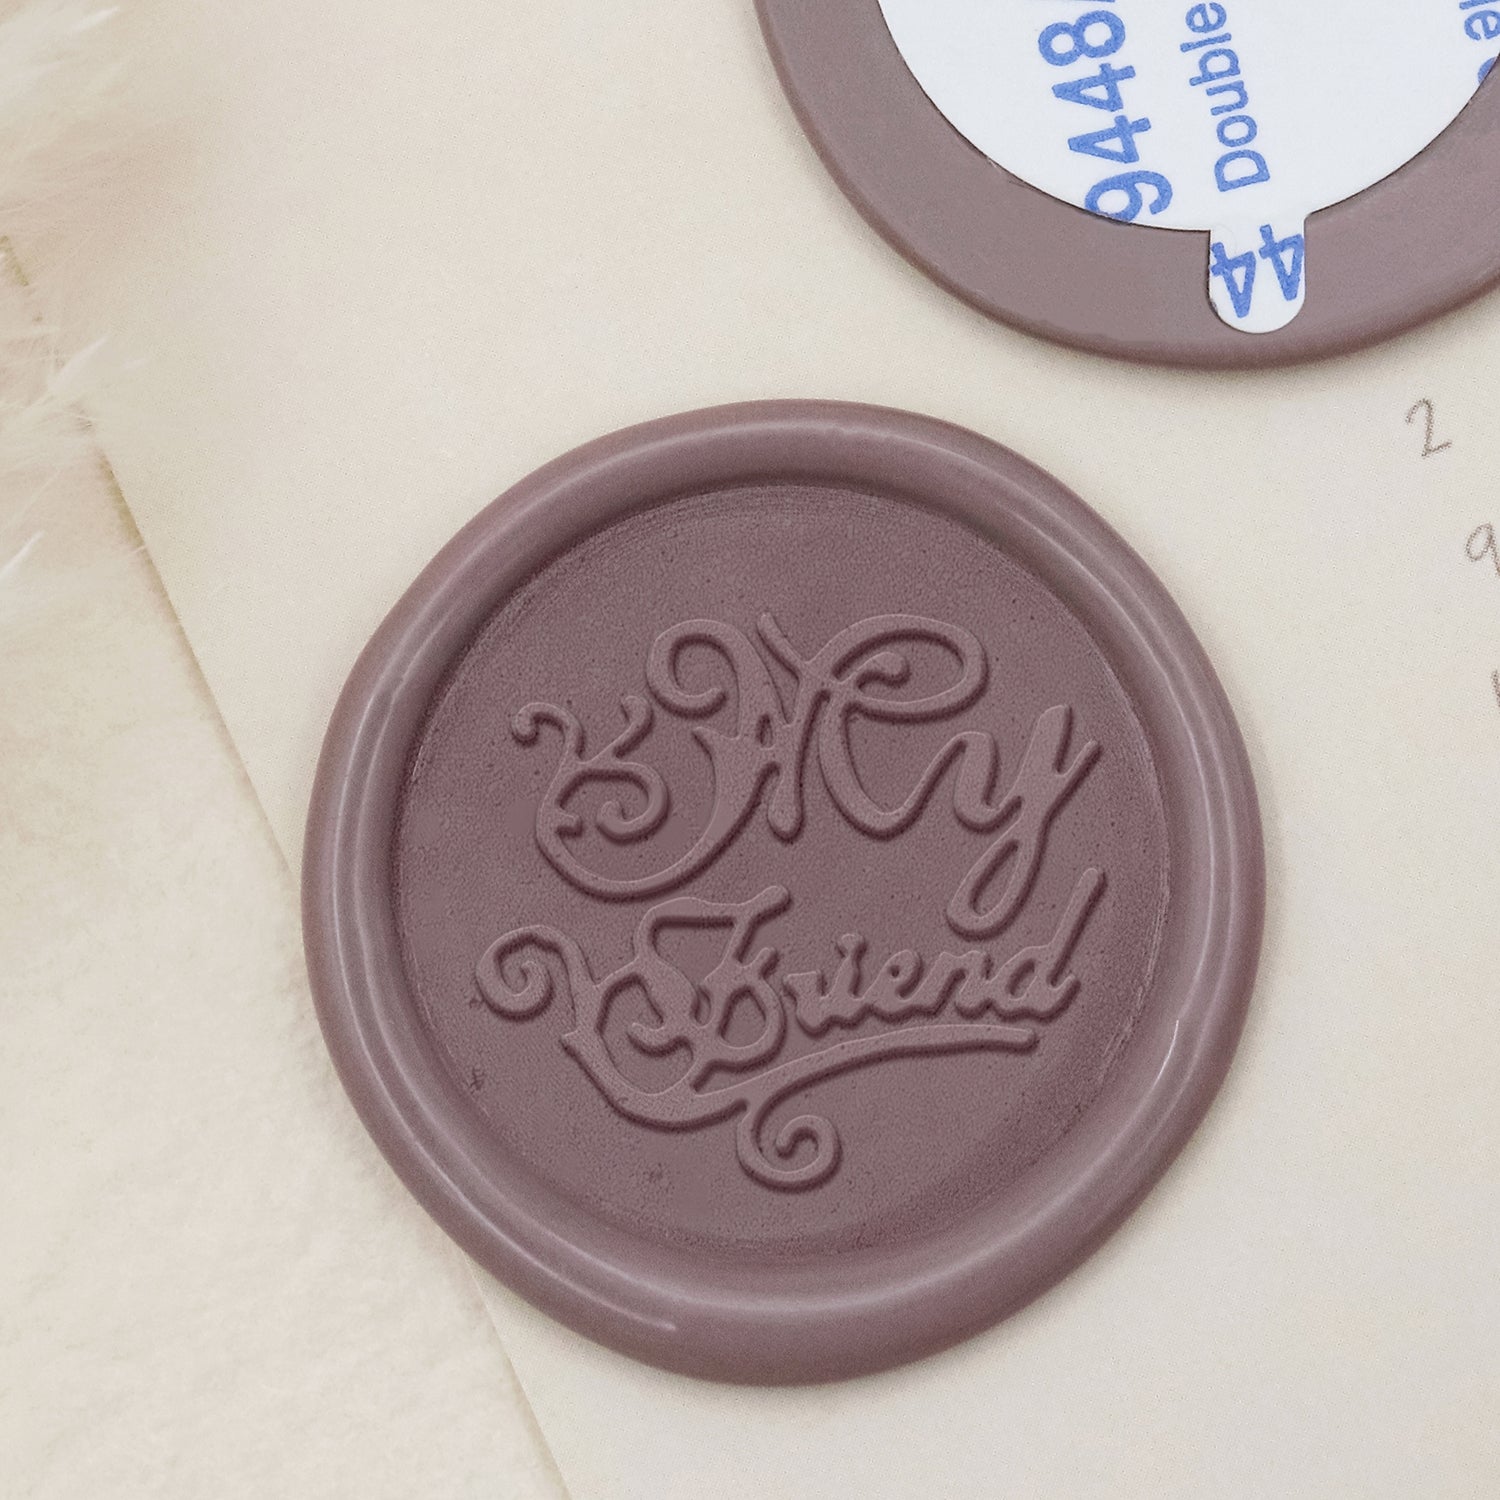 Stamprints Greeting Self-adhesive Wax Seal Stickers - My Friend 1